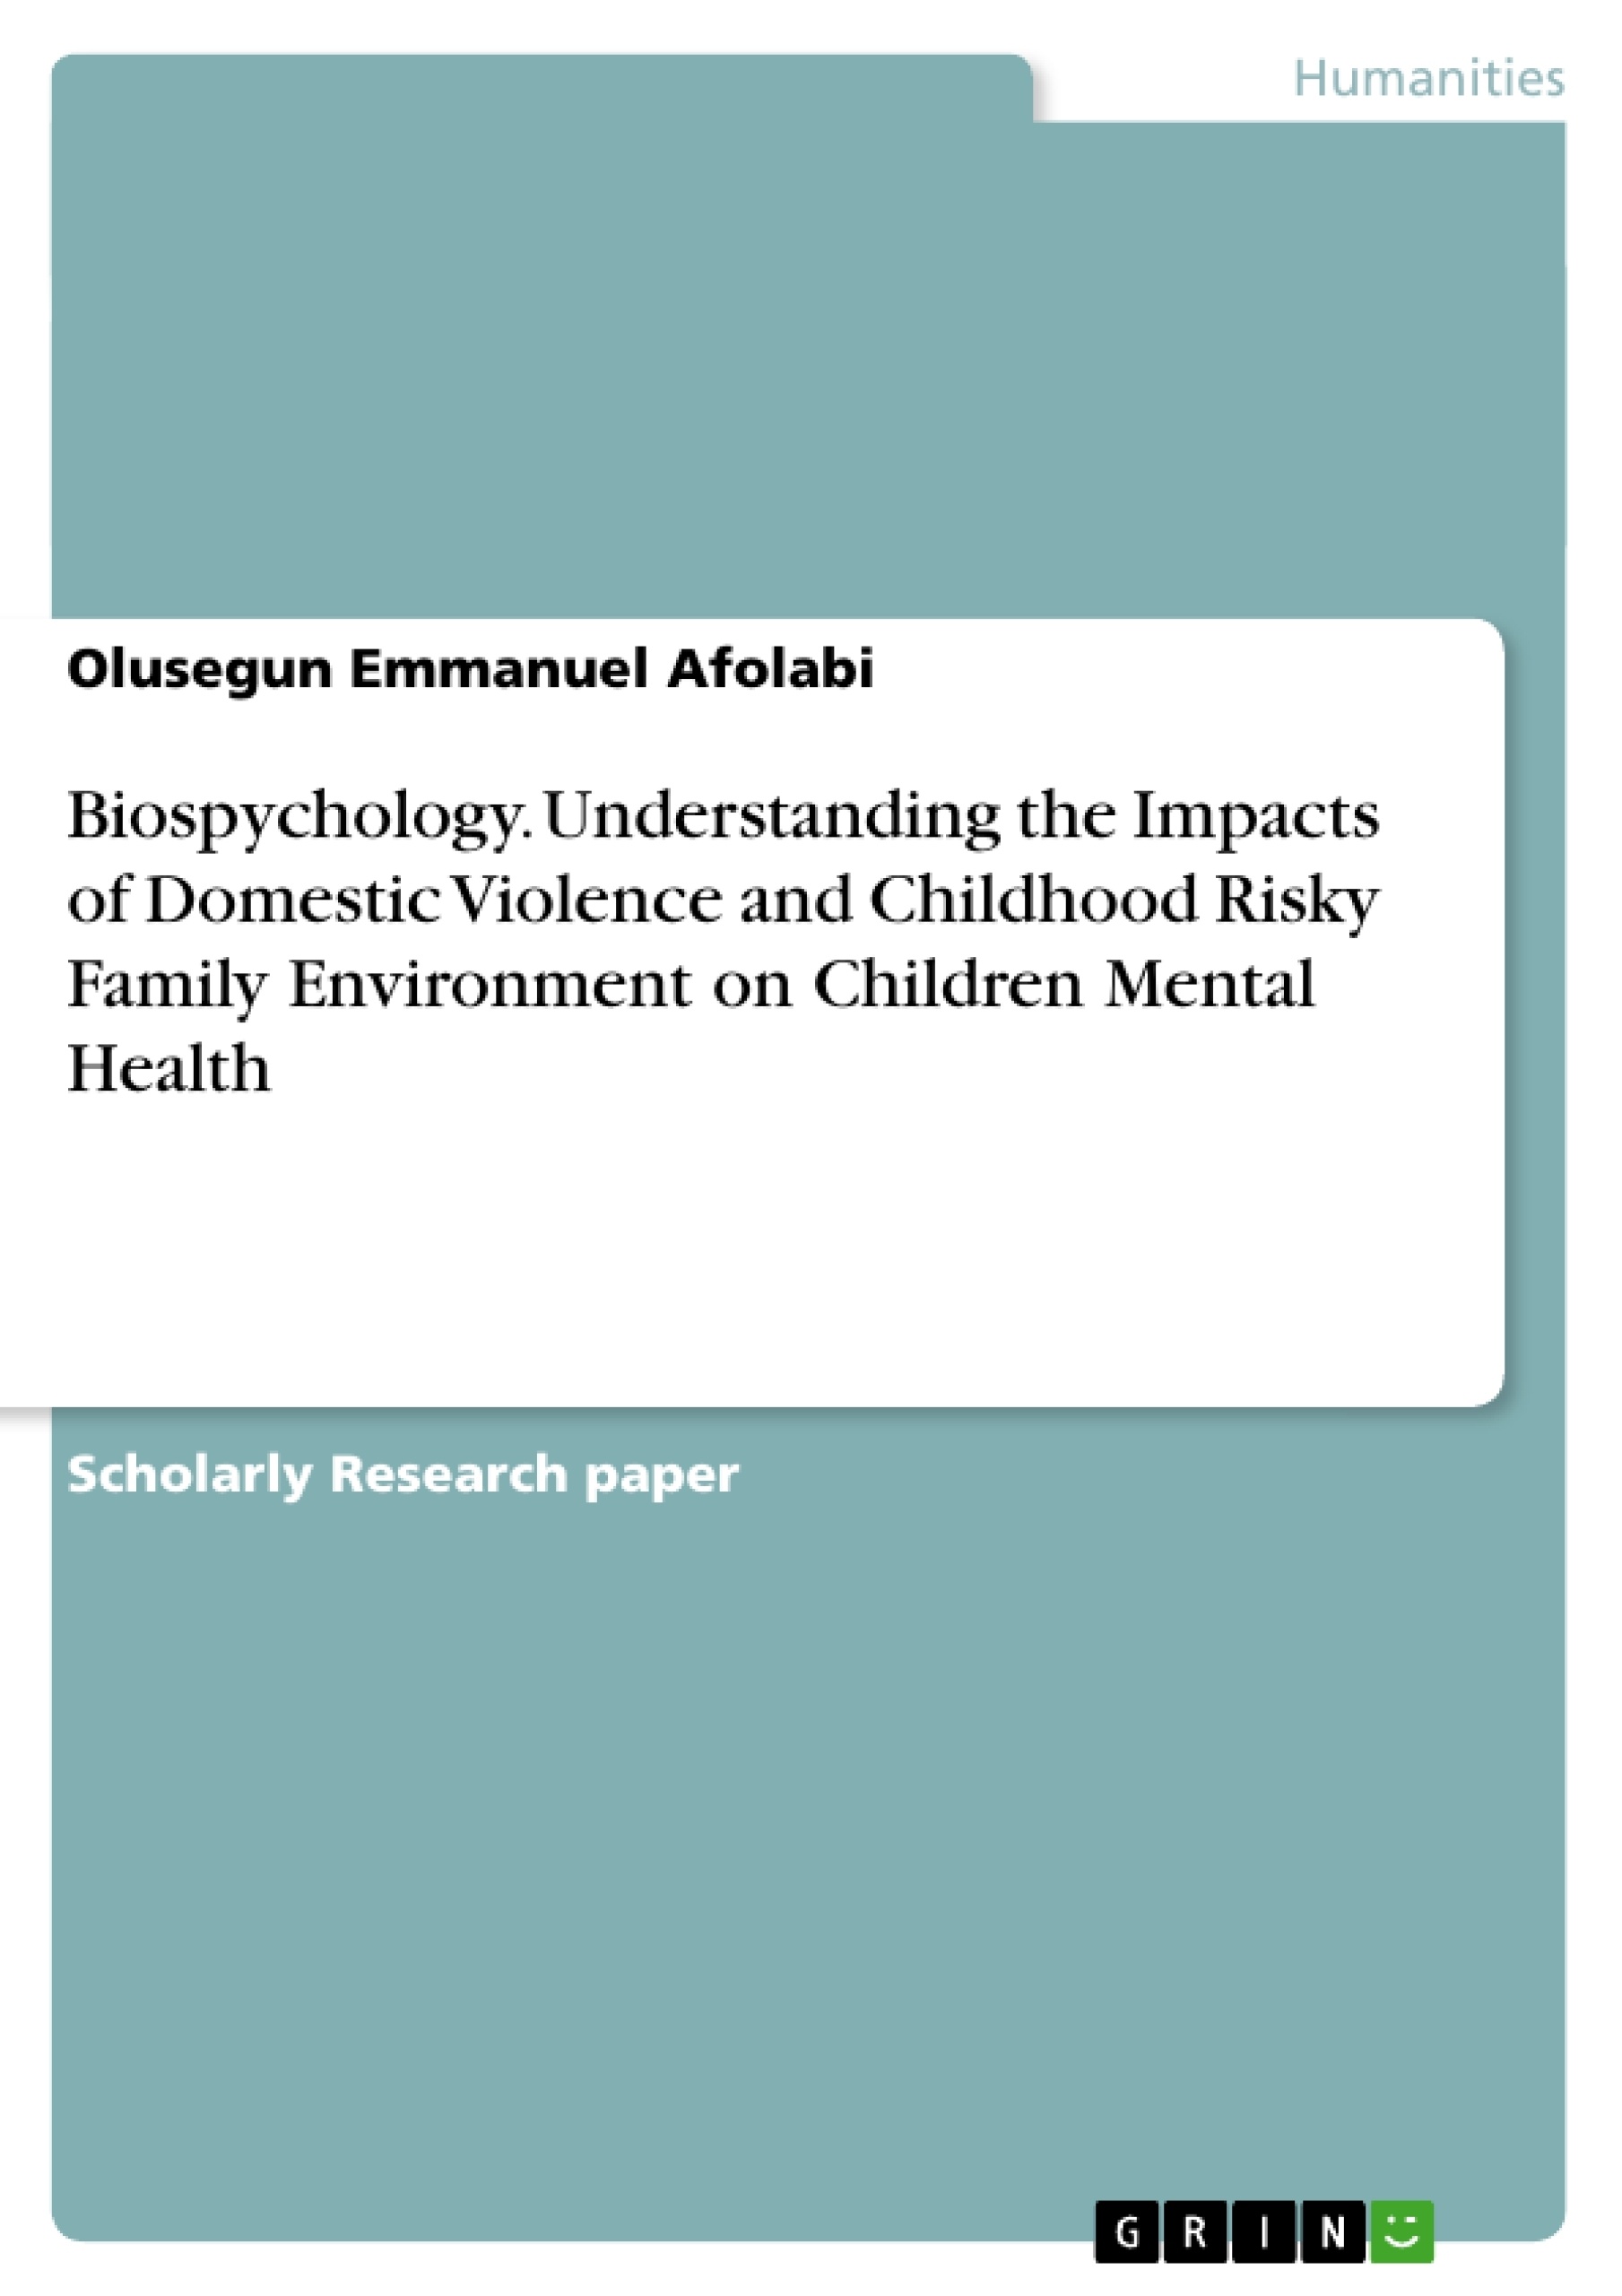 Title: Biospychology. Understanding the Impacts of Domestic Violence and Childhood Risky Family Environment on Children Mental Health